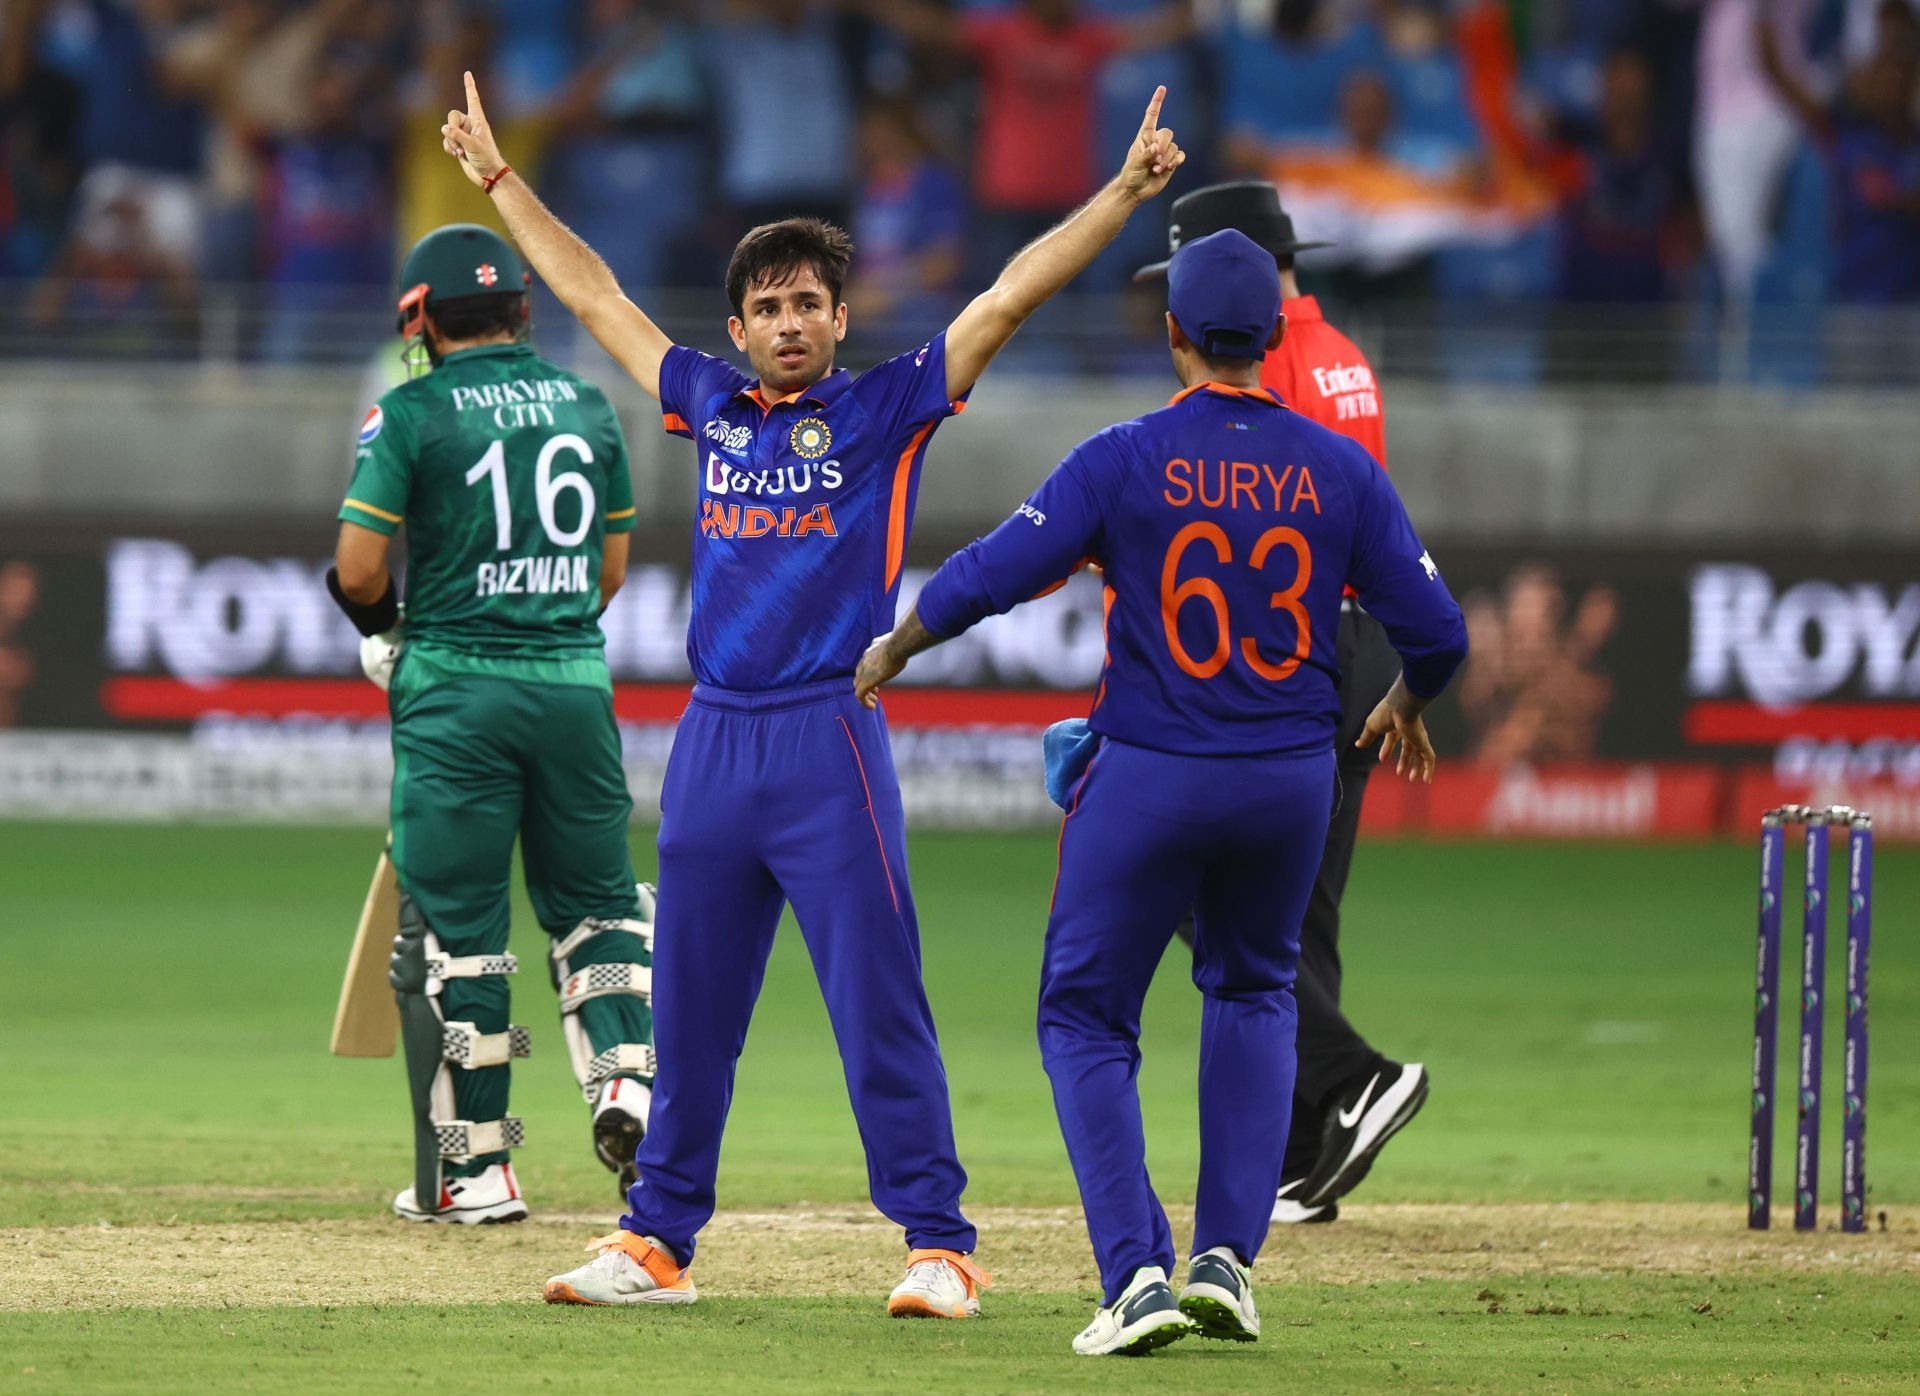 Ravi Bishnoi has been a wicket-taking bowler for the Men in Blue, but didn&#039;t make the squads for their tours of New Zealand or Bangladesh (Image: Getty)